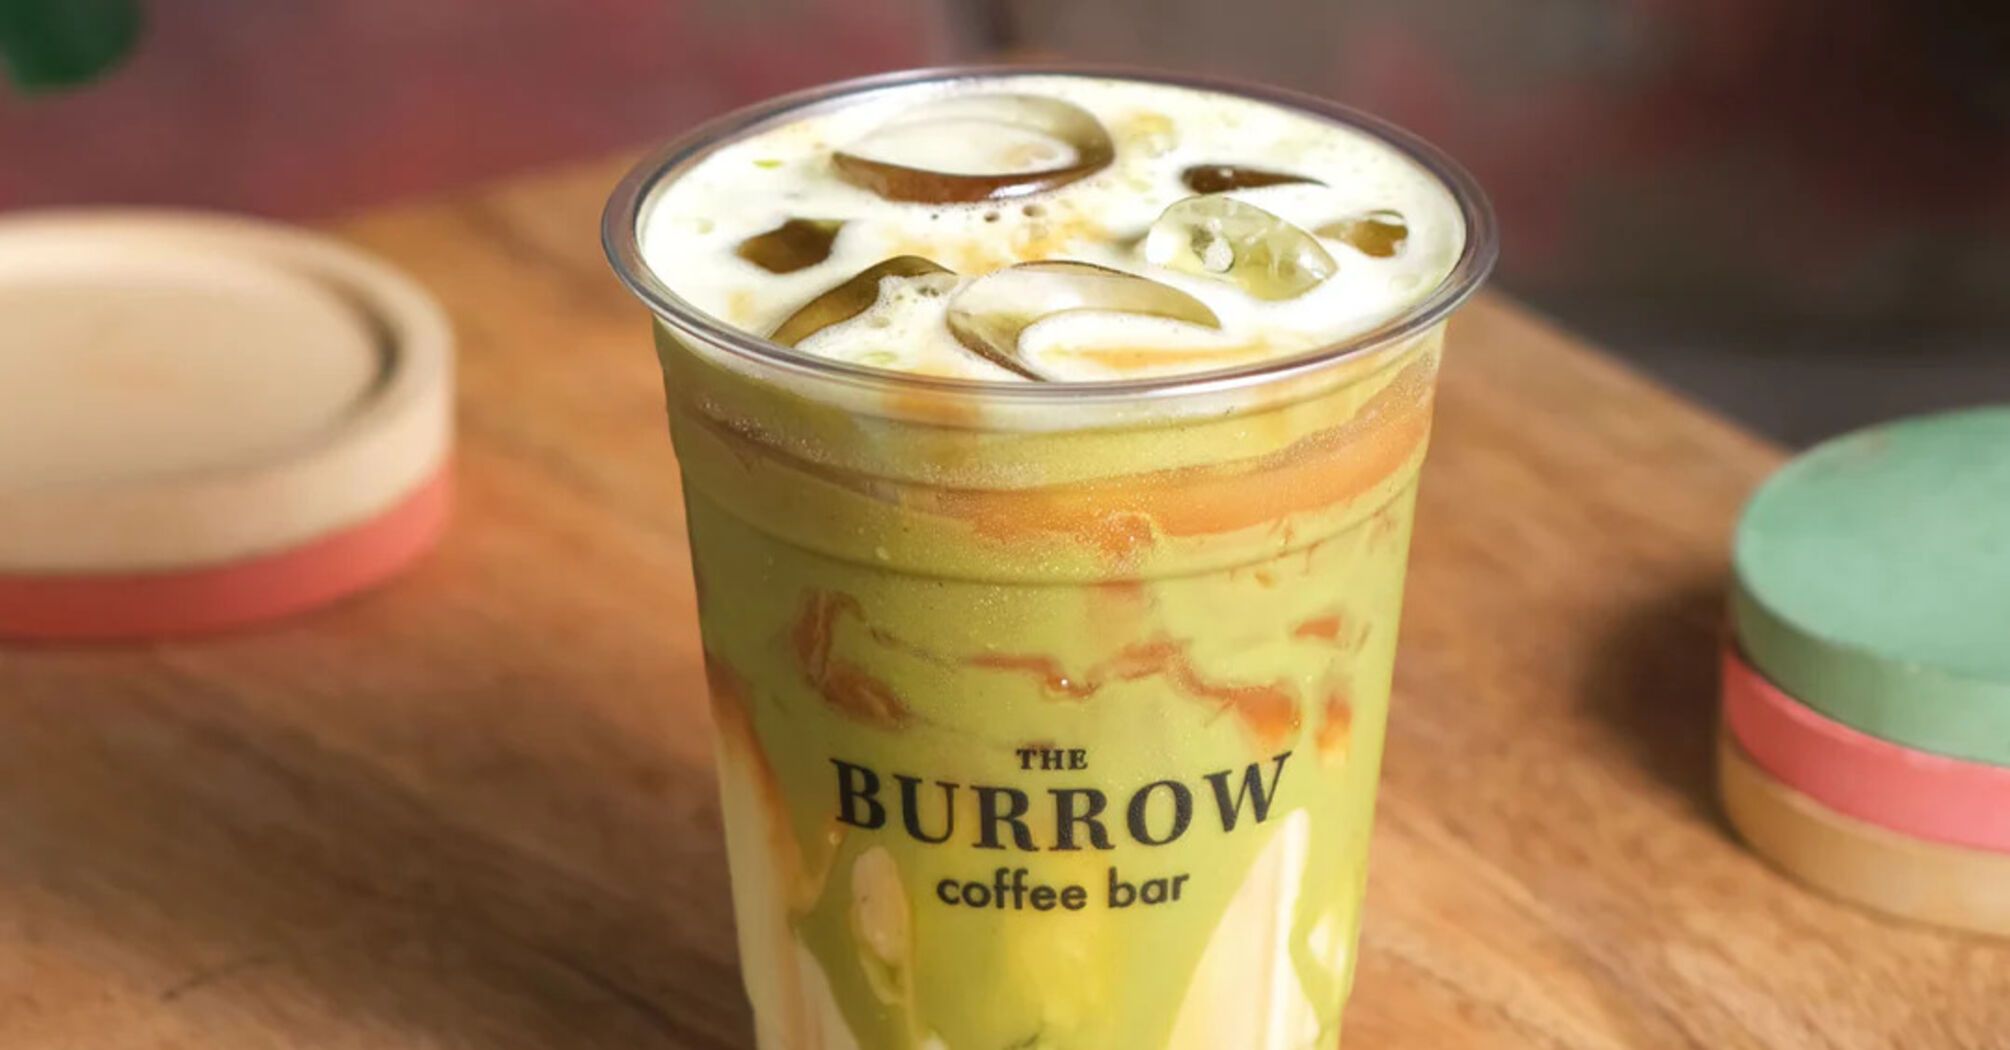 Kitchen Starbucks: How to Make Iced Pistachio Latte at Home